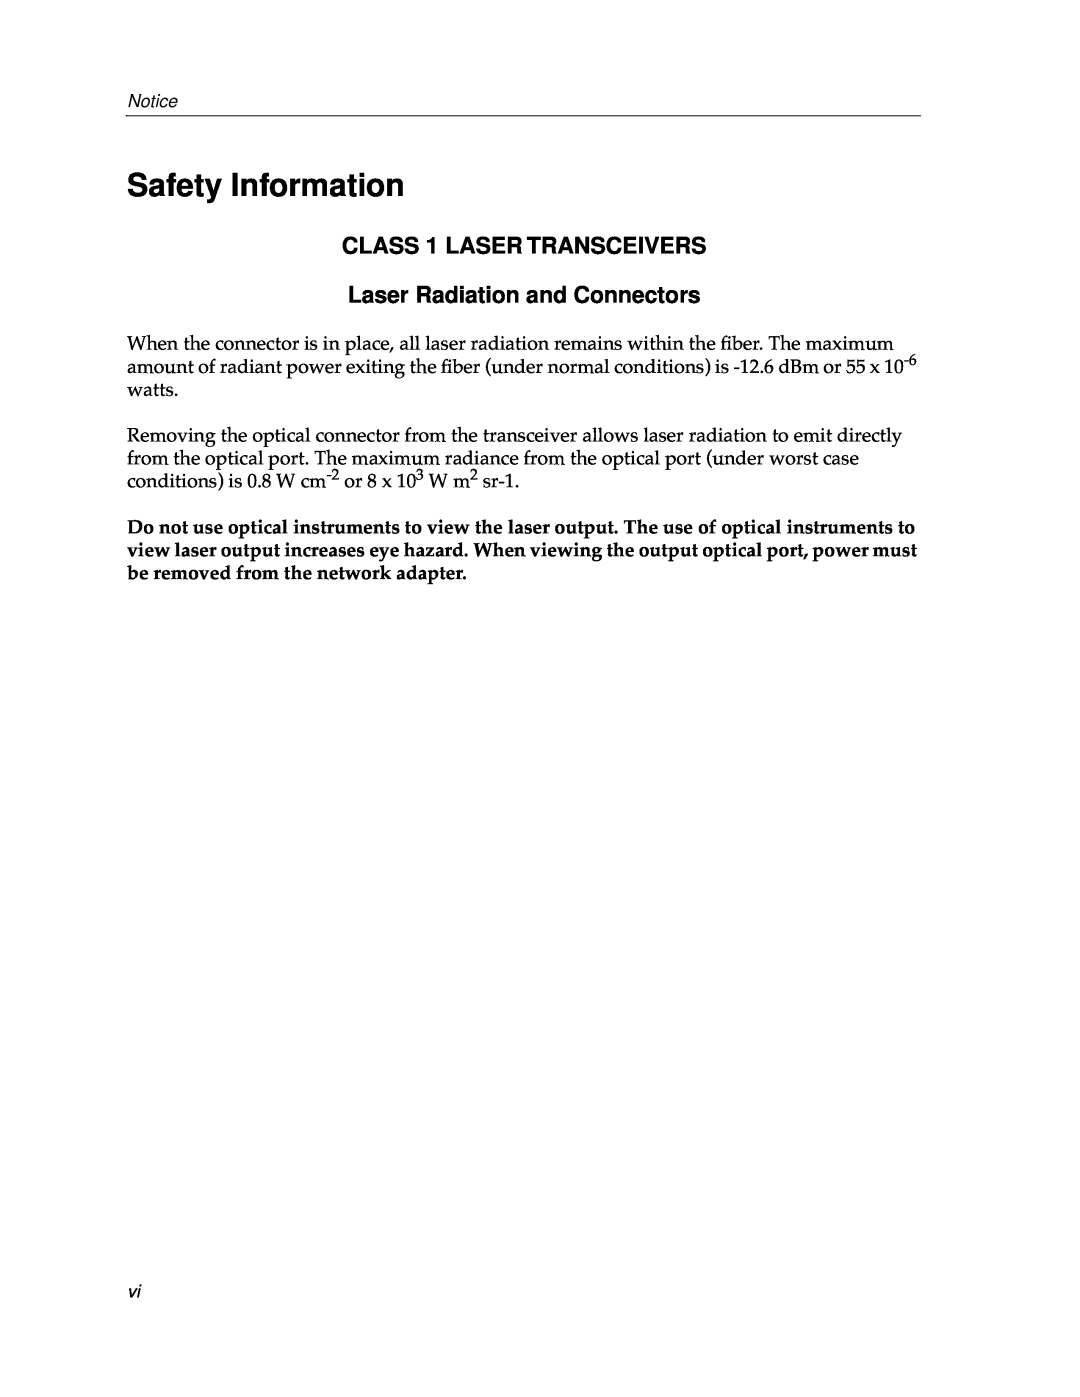 Cabletron Systems 9F310-02, 9F315-02 manual Safety Information, CLASS 1 LASER TRANSCEIVERS Laser Radiation and Connectors 